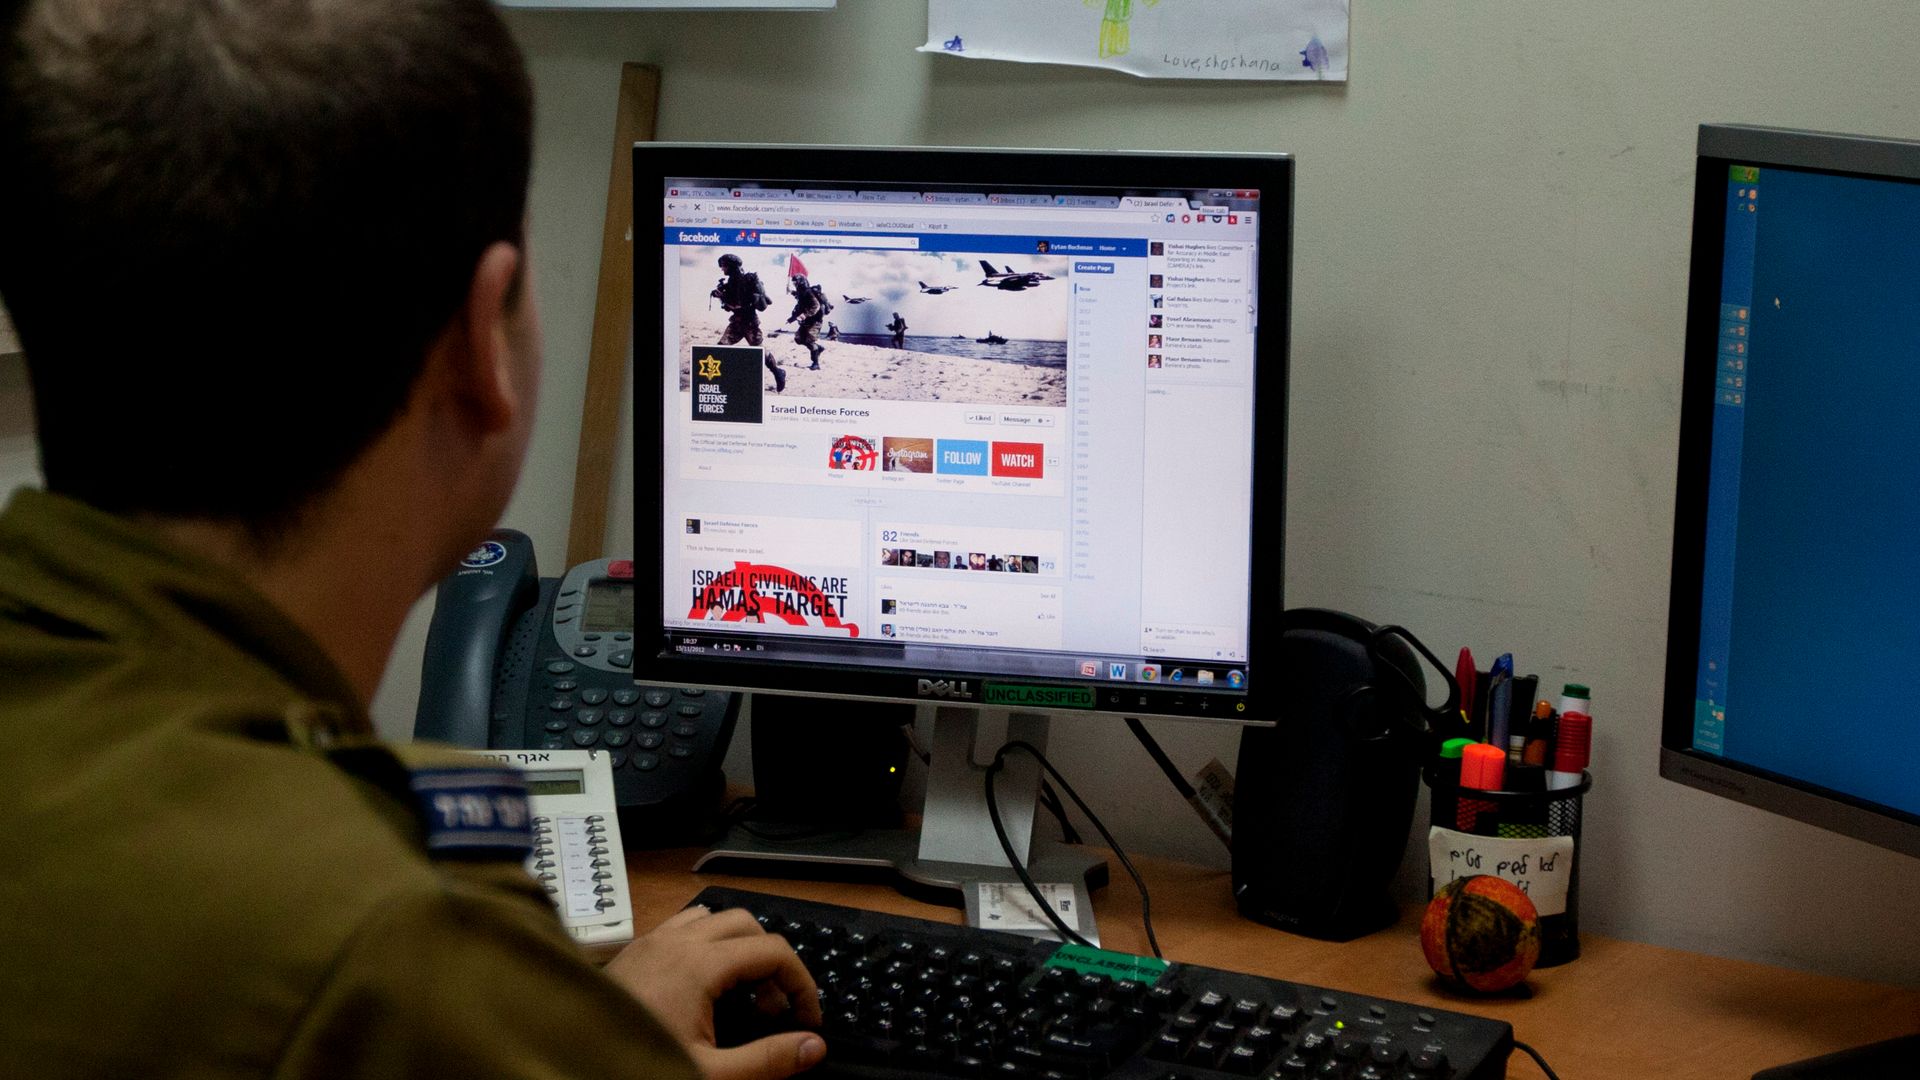 People are getting heated about the Israel-Hamas war on social media, but fighting on the platforms is creating more problems.